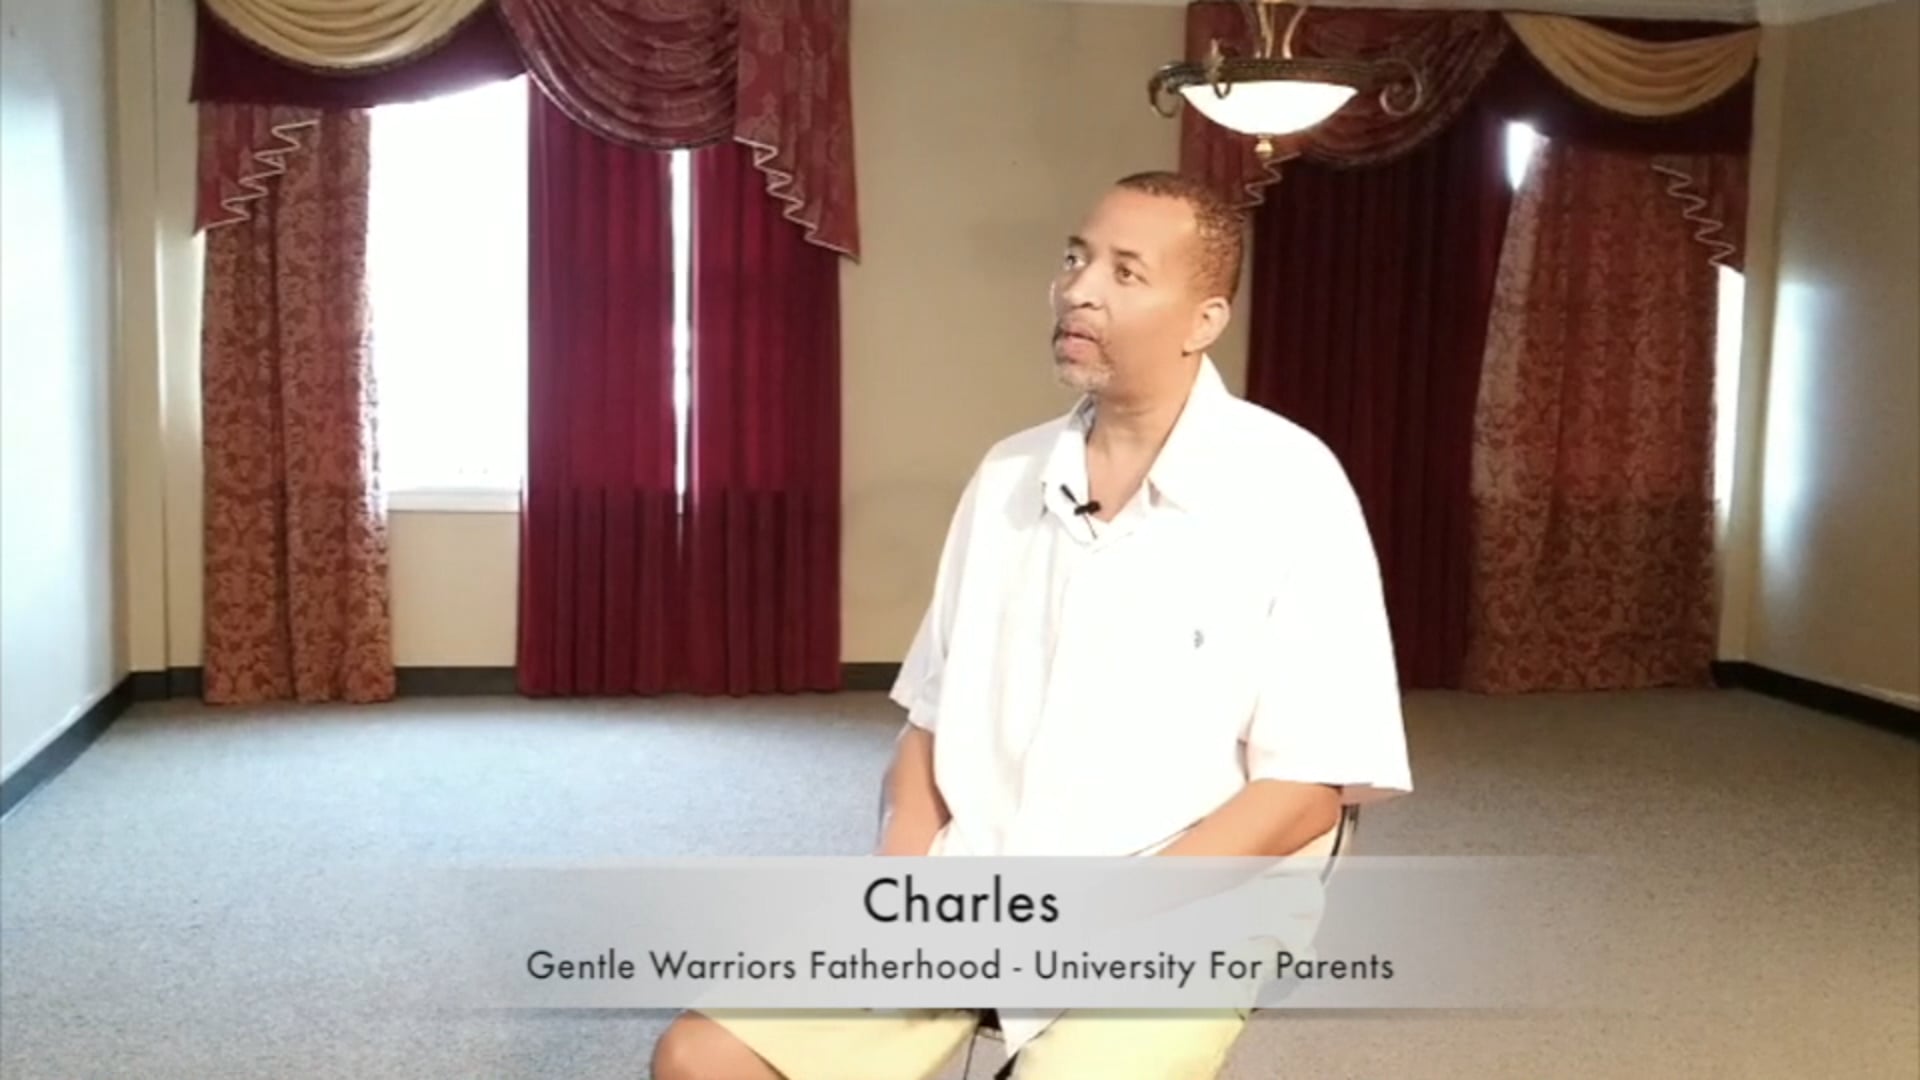 Gentle Warriors at University for Parents - Charles